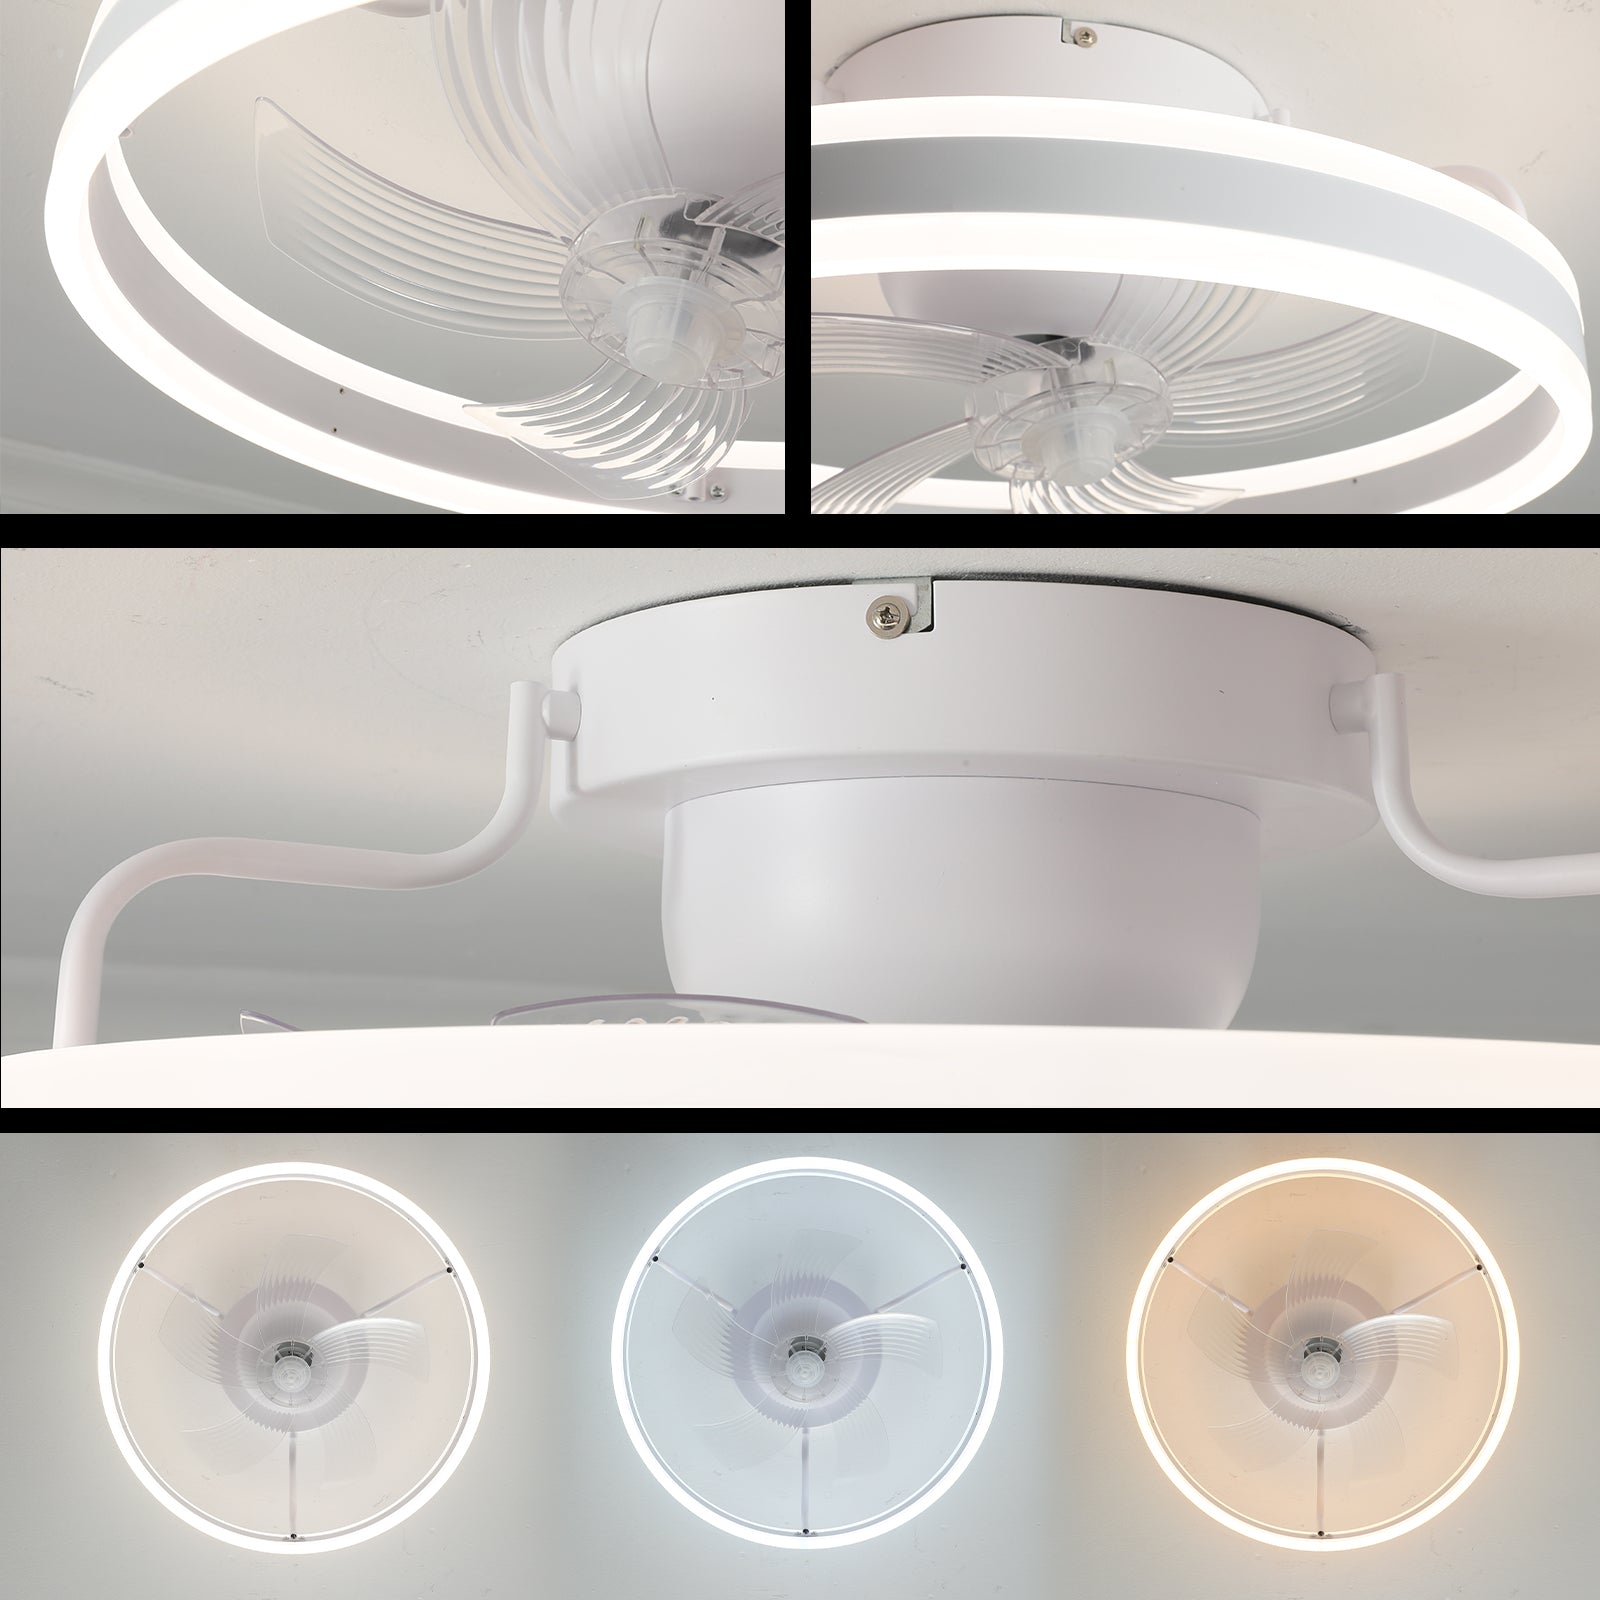 360 ° Shake your head Ceiling Fans with Lights With Remote, Small Black Ceiling Fan with Dimming for Bedroom（White)